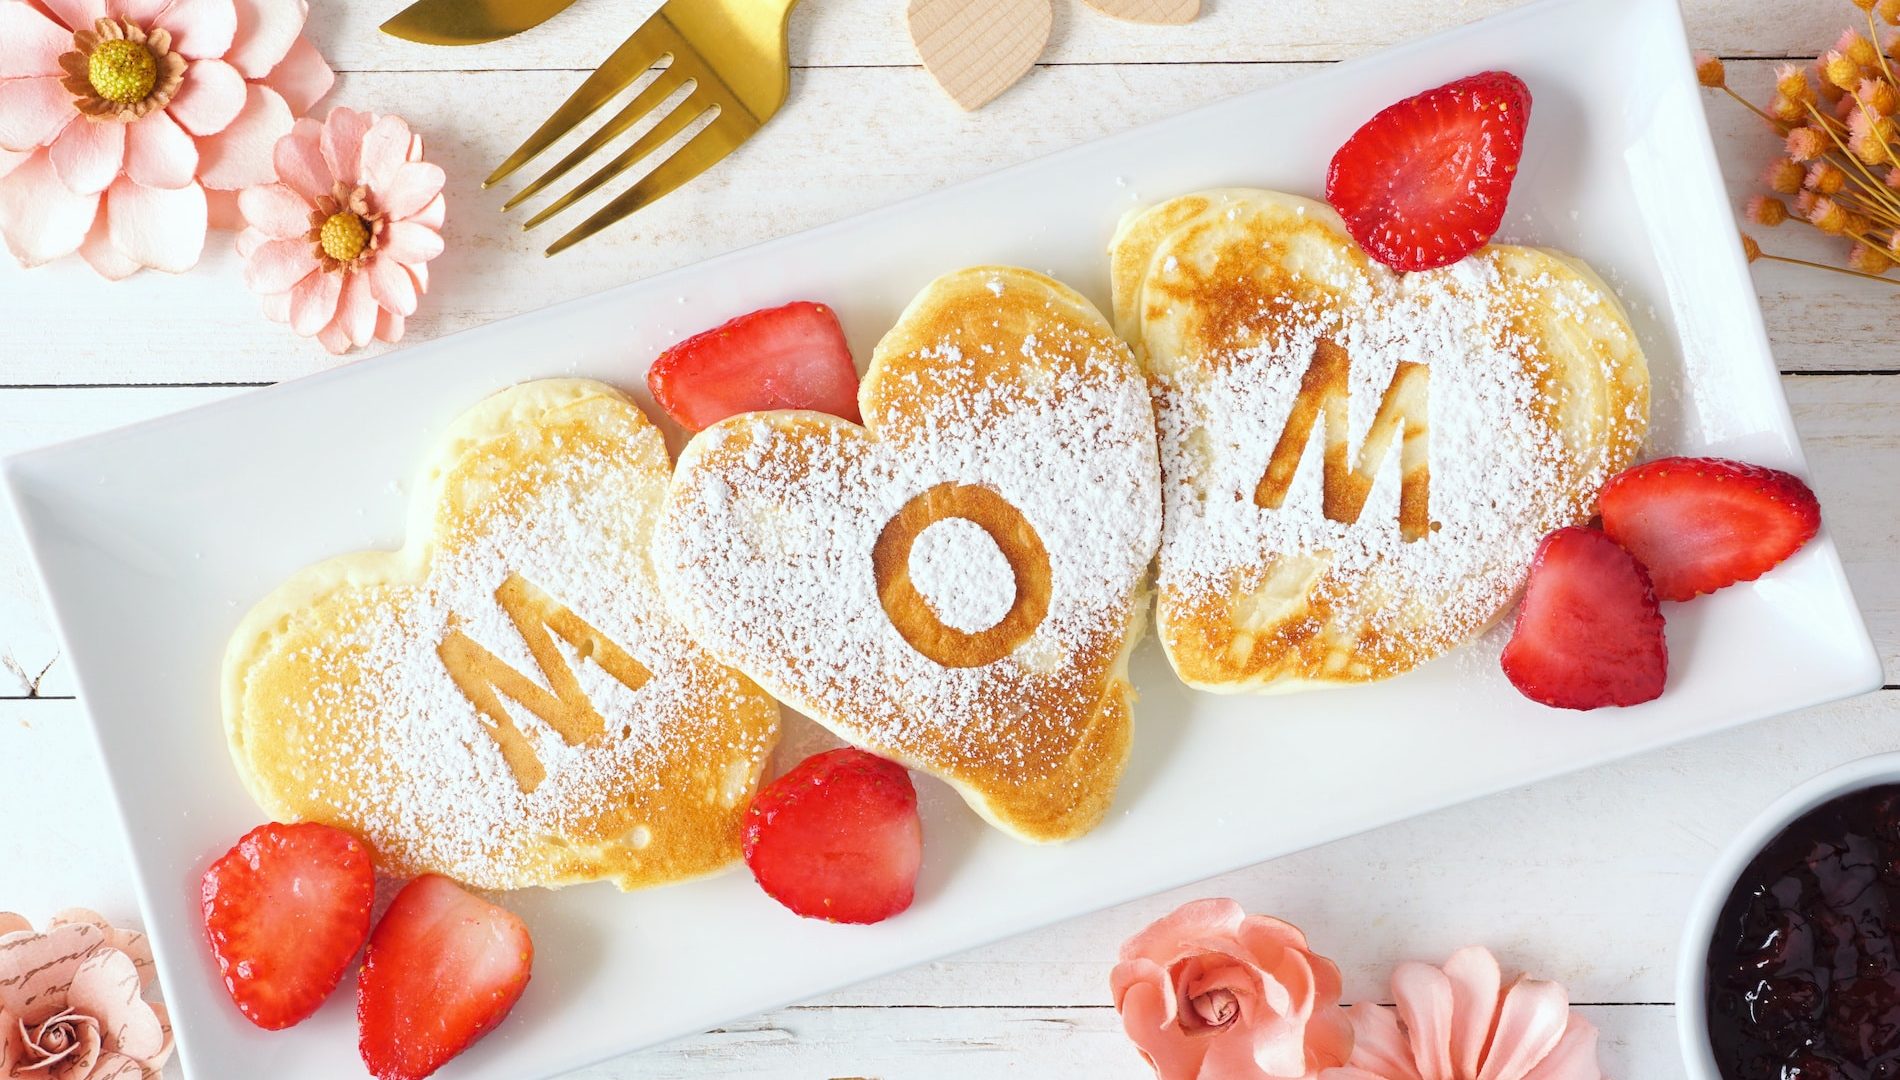 Heart shaped pancakes with MOM letters. Mothers Day breakfast concept. Top view table scene with a white wood background.